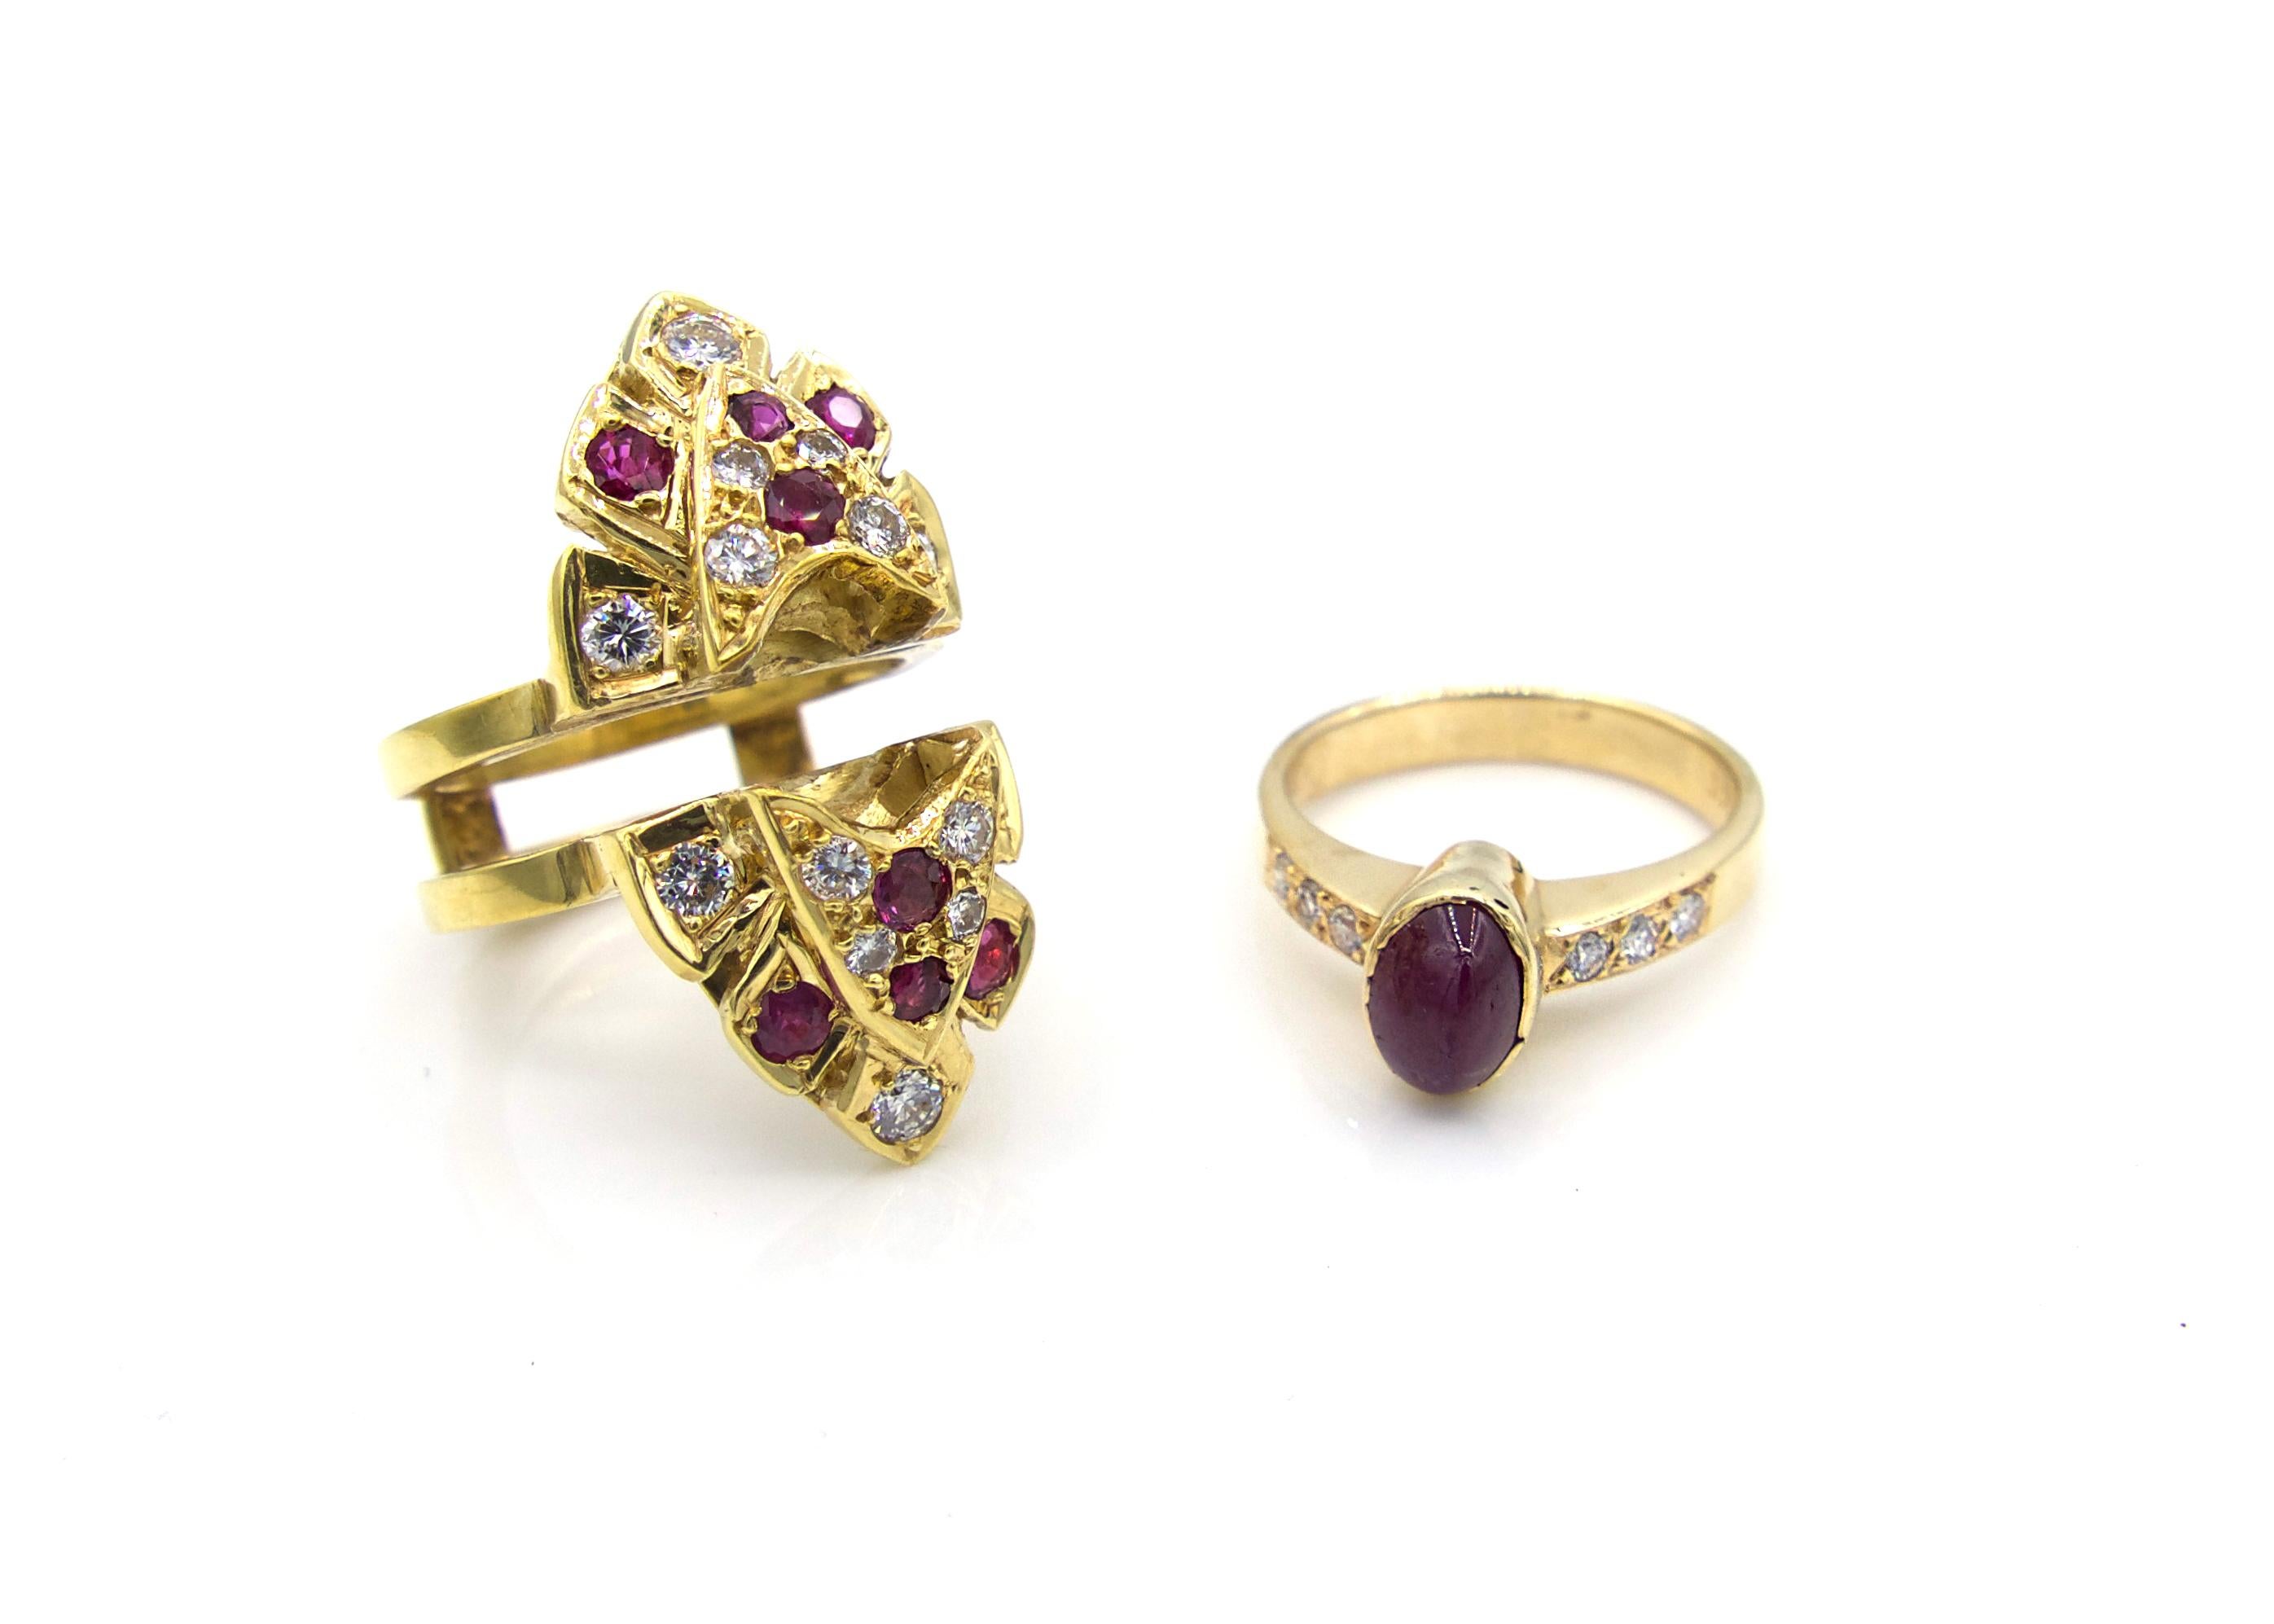 This remarkable 1980s marquise-shaped ring comes as a two-part set. The inner band is made of 14K yellow gold with an oval cabochon ruby at its center, flanked by 3 round-cut diamonds on both sides. The larger marquise-shaped outer piece, in which